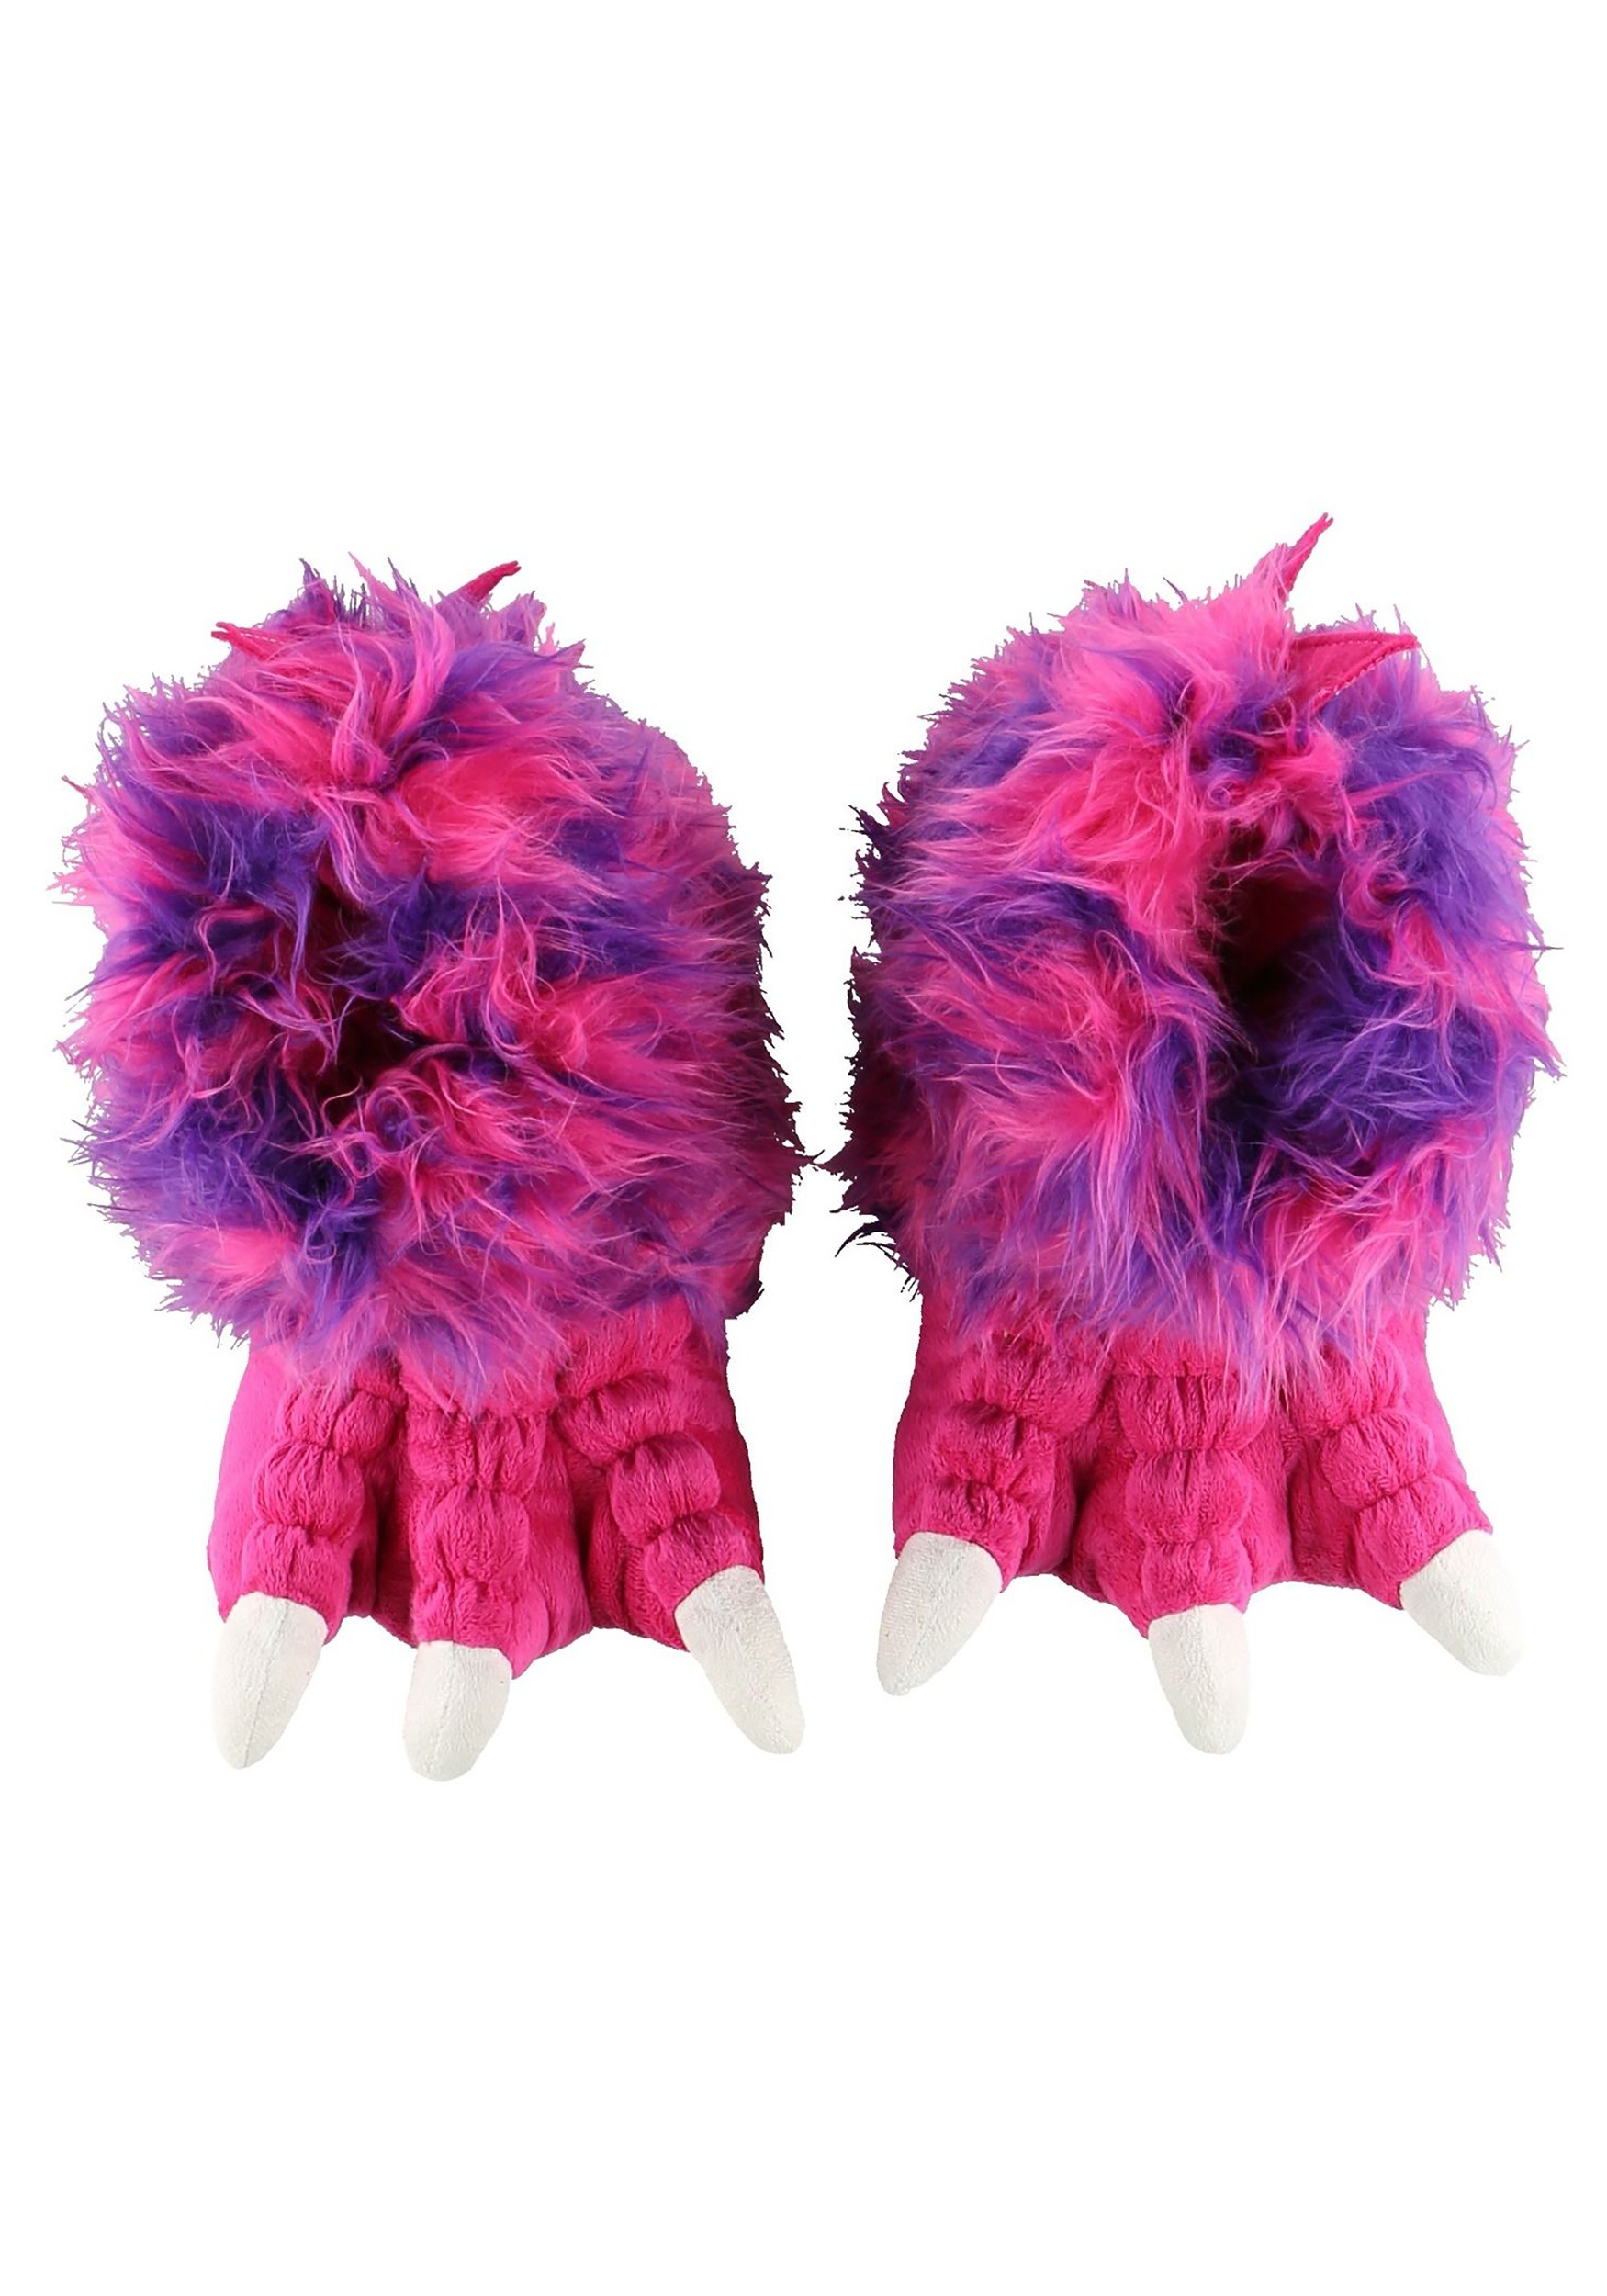 Pink Monster Paw Adult Slippers